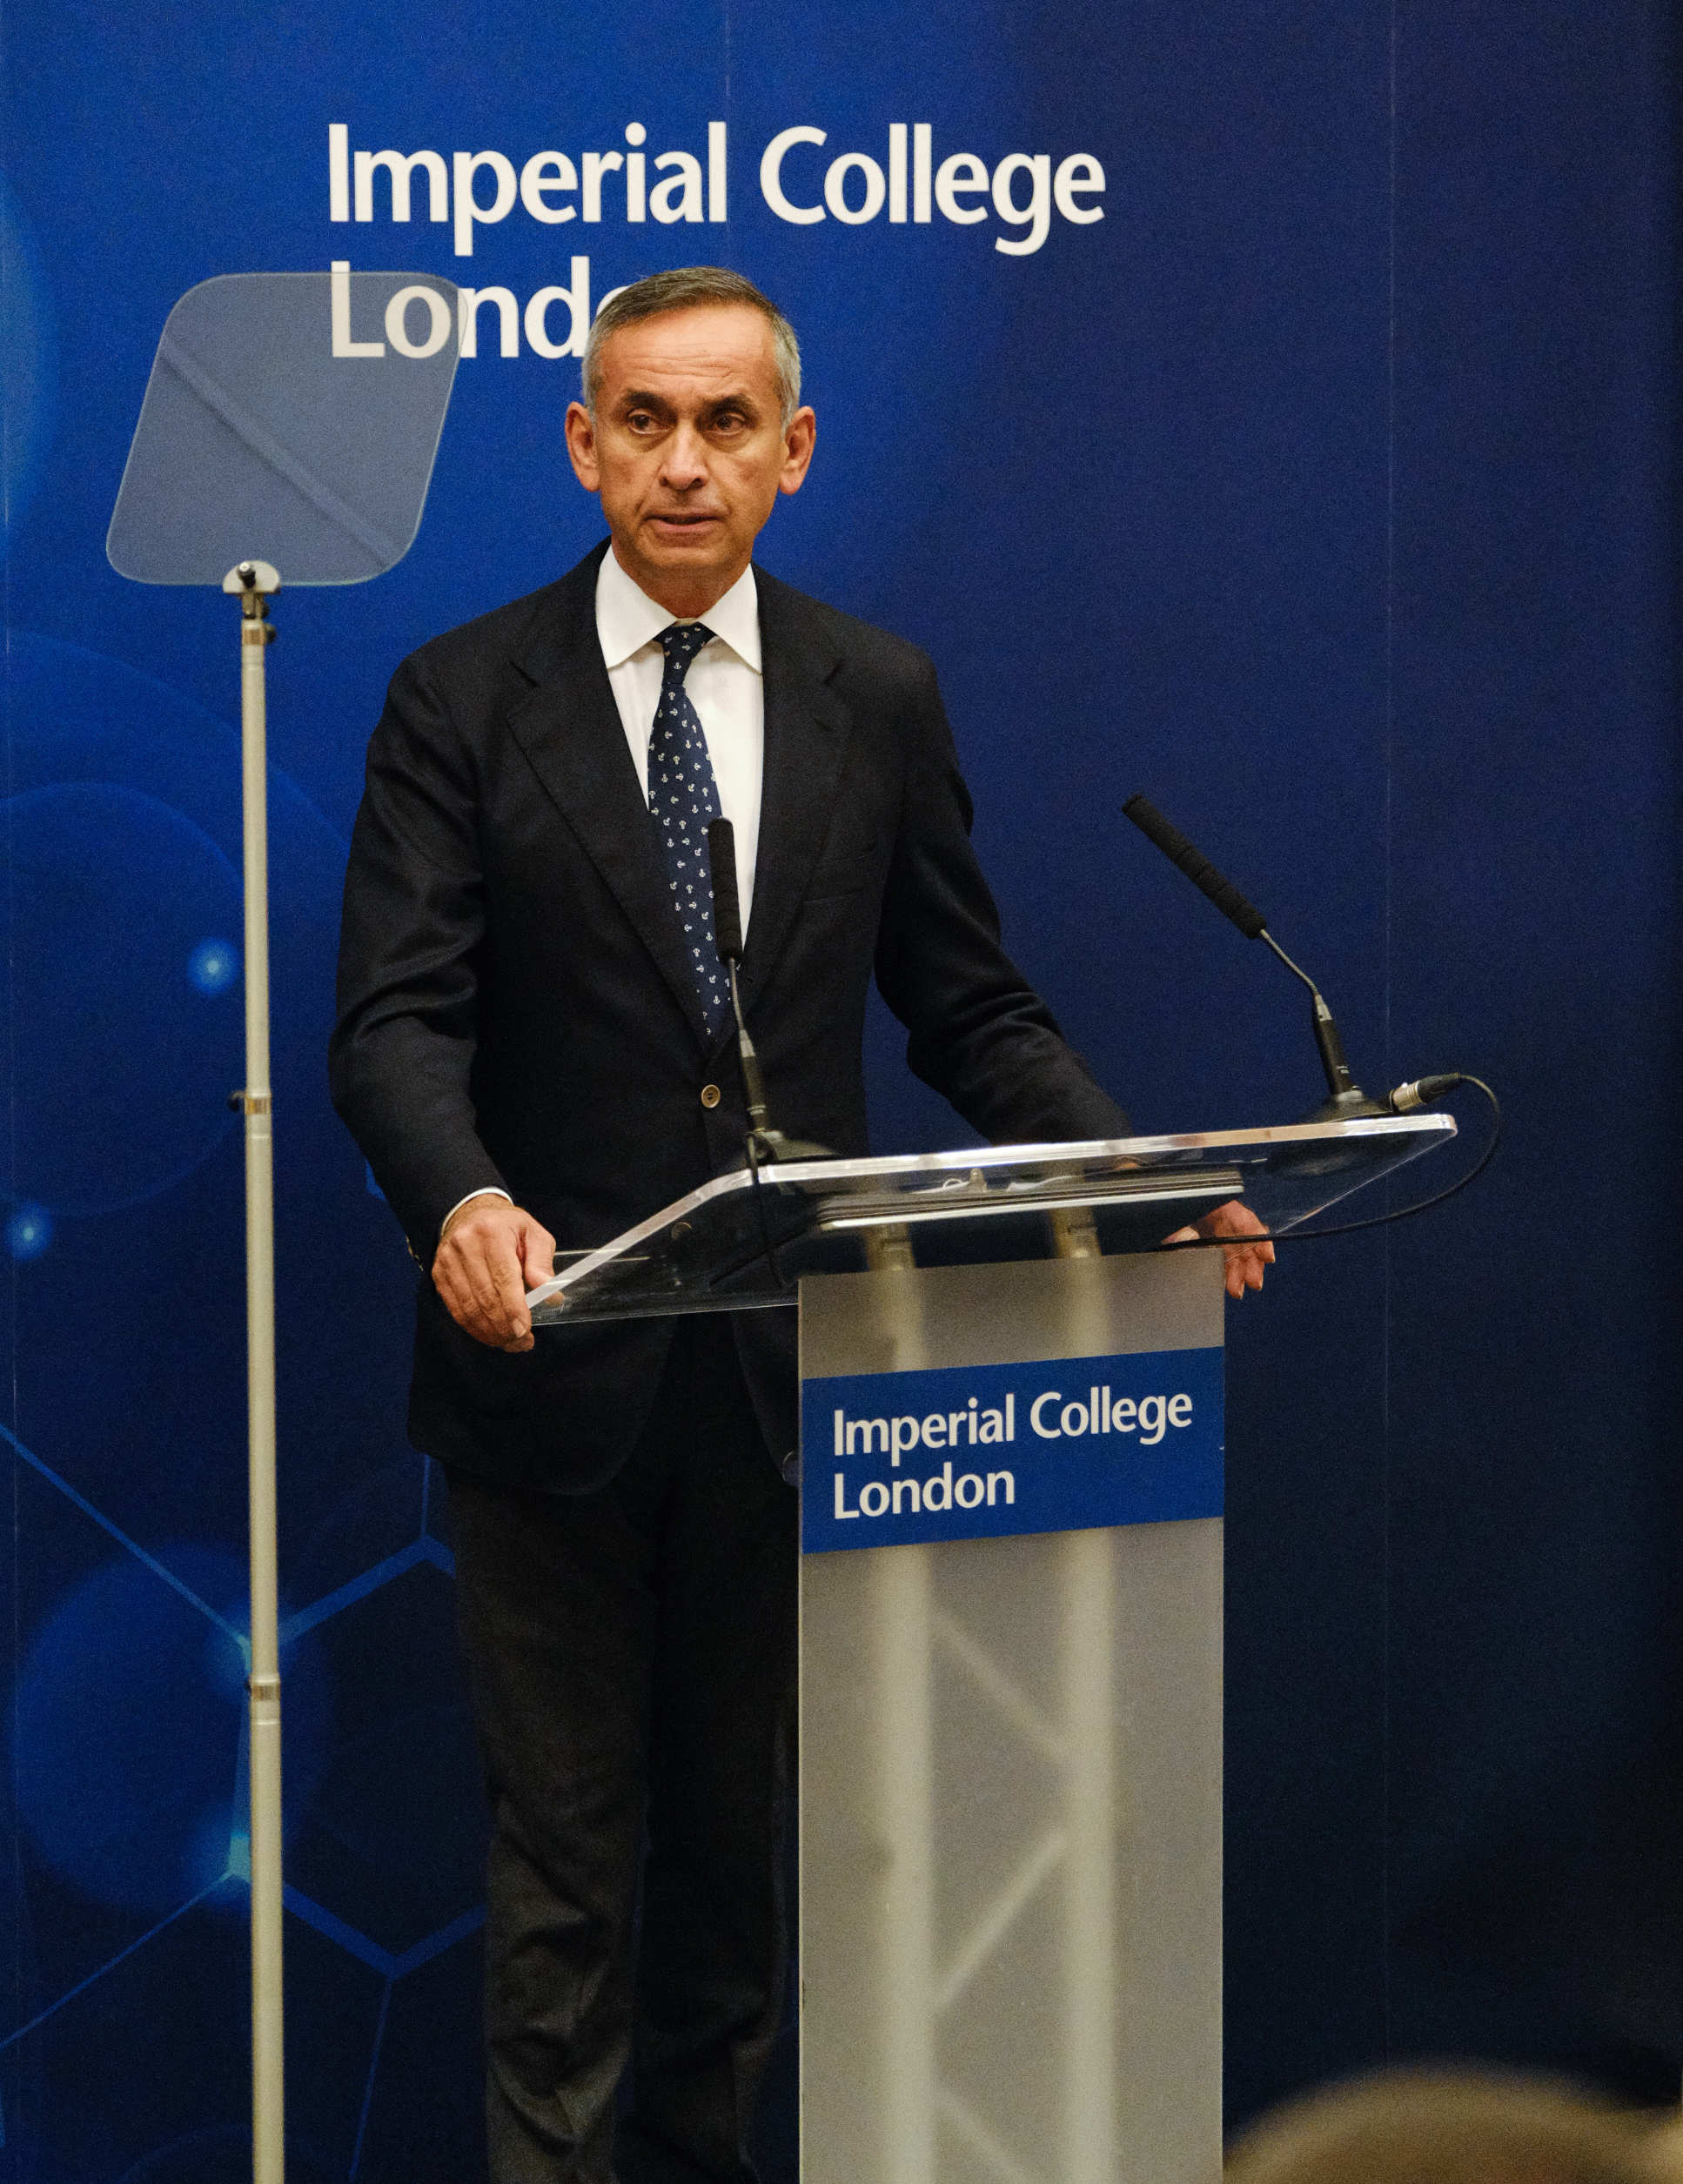 Lord Darzi said the Vice President had brought extraordinary leadership to the fight against cancer